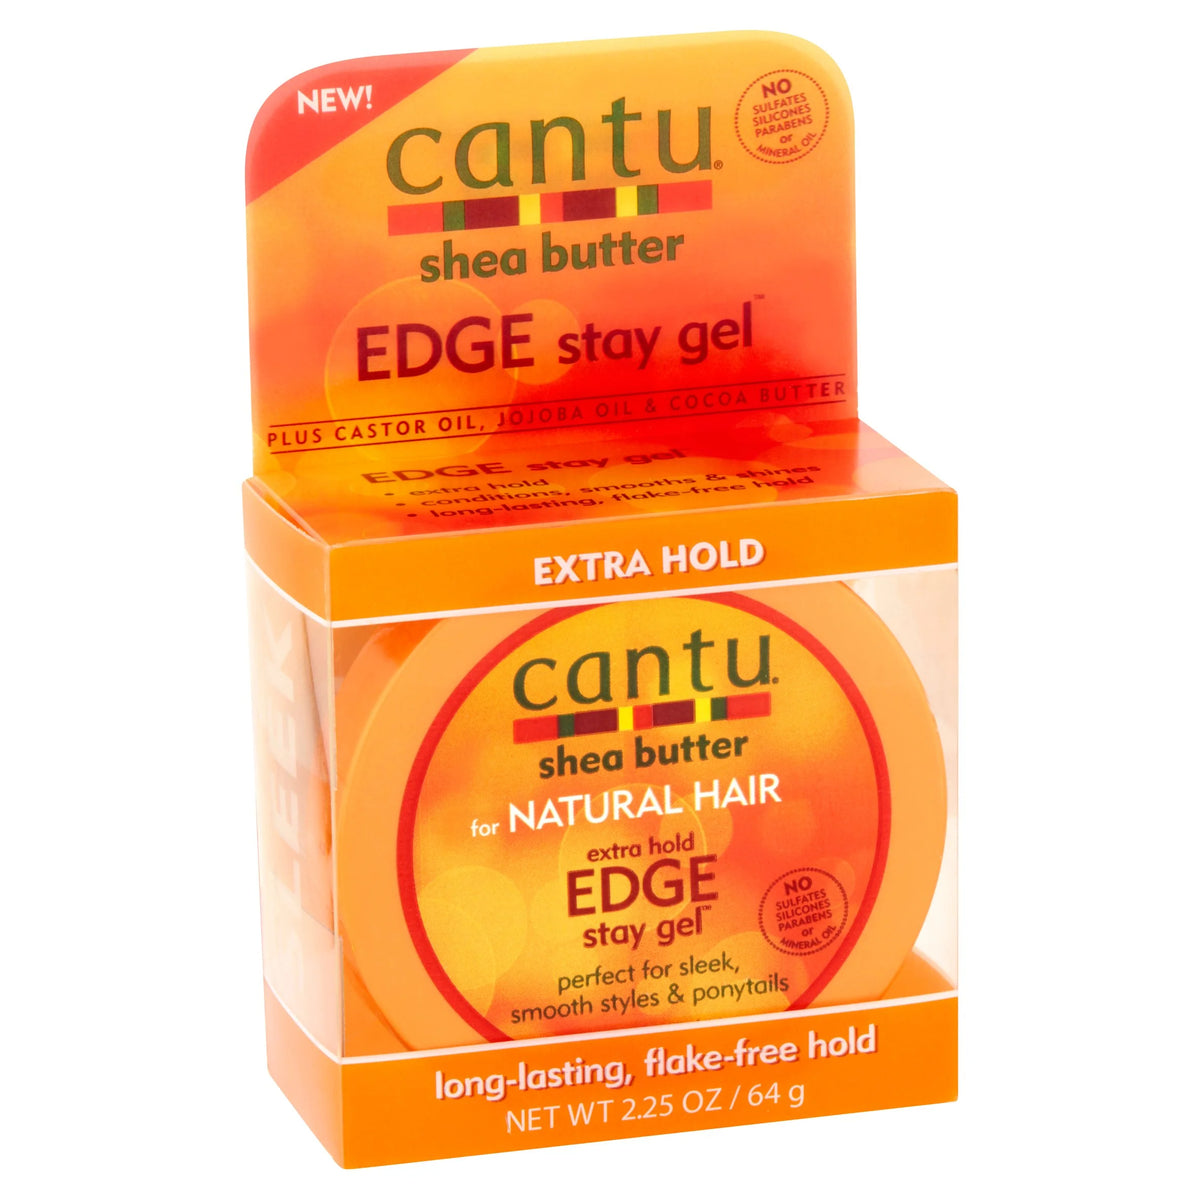 Cantu Shea Butter Extra Hold Edge Stay Gel - 64gm